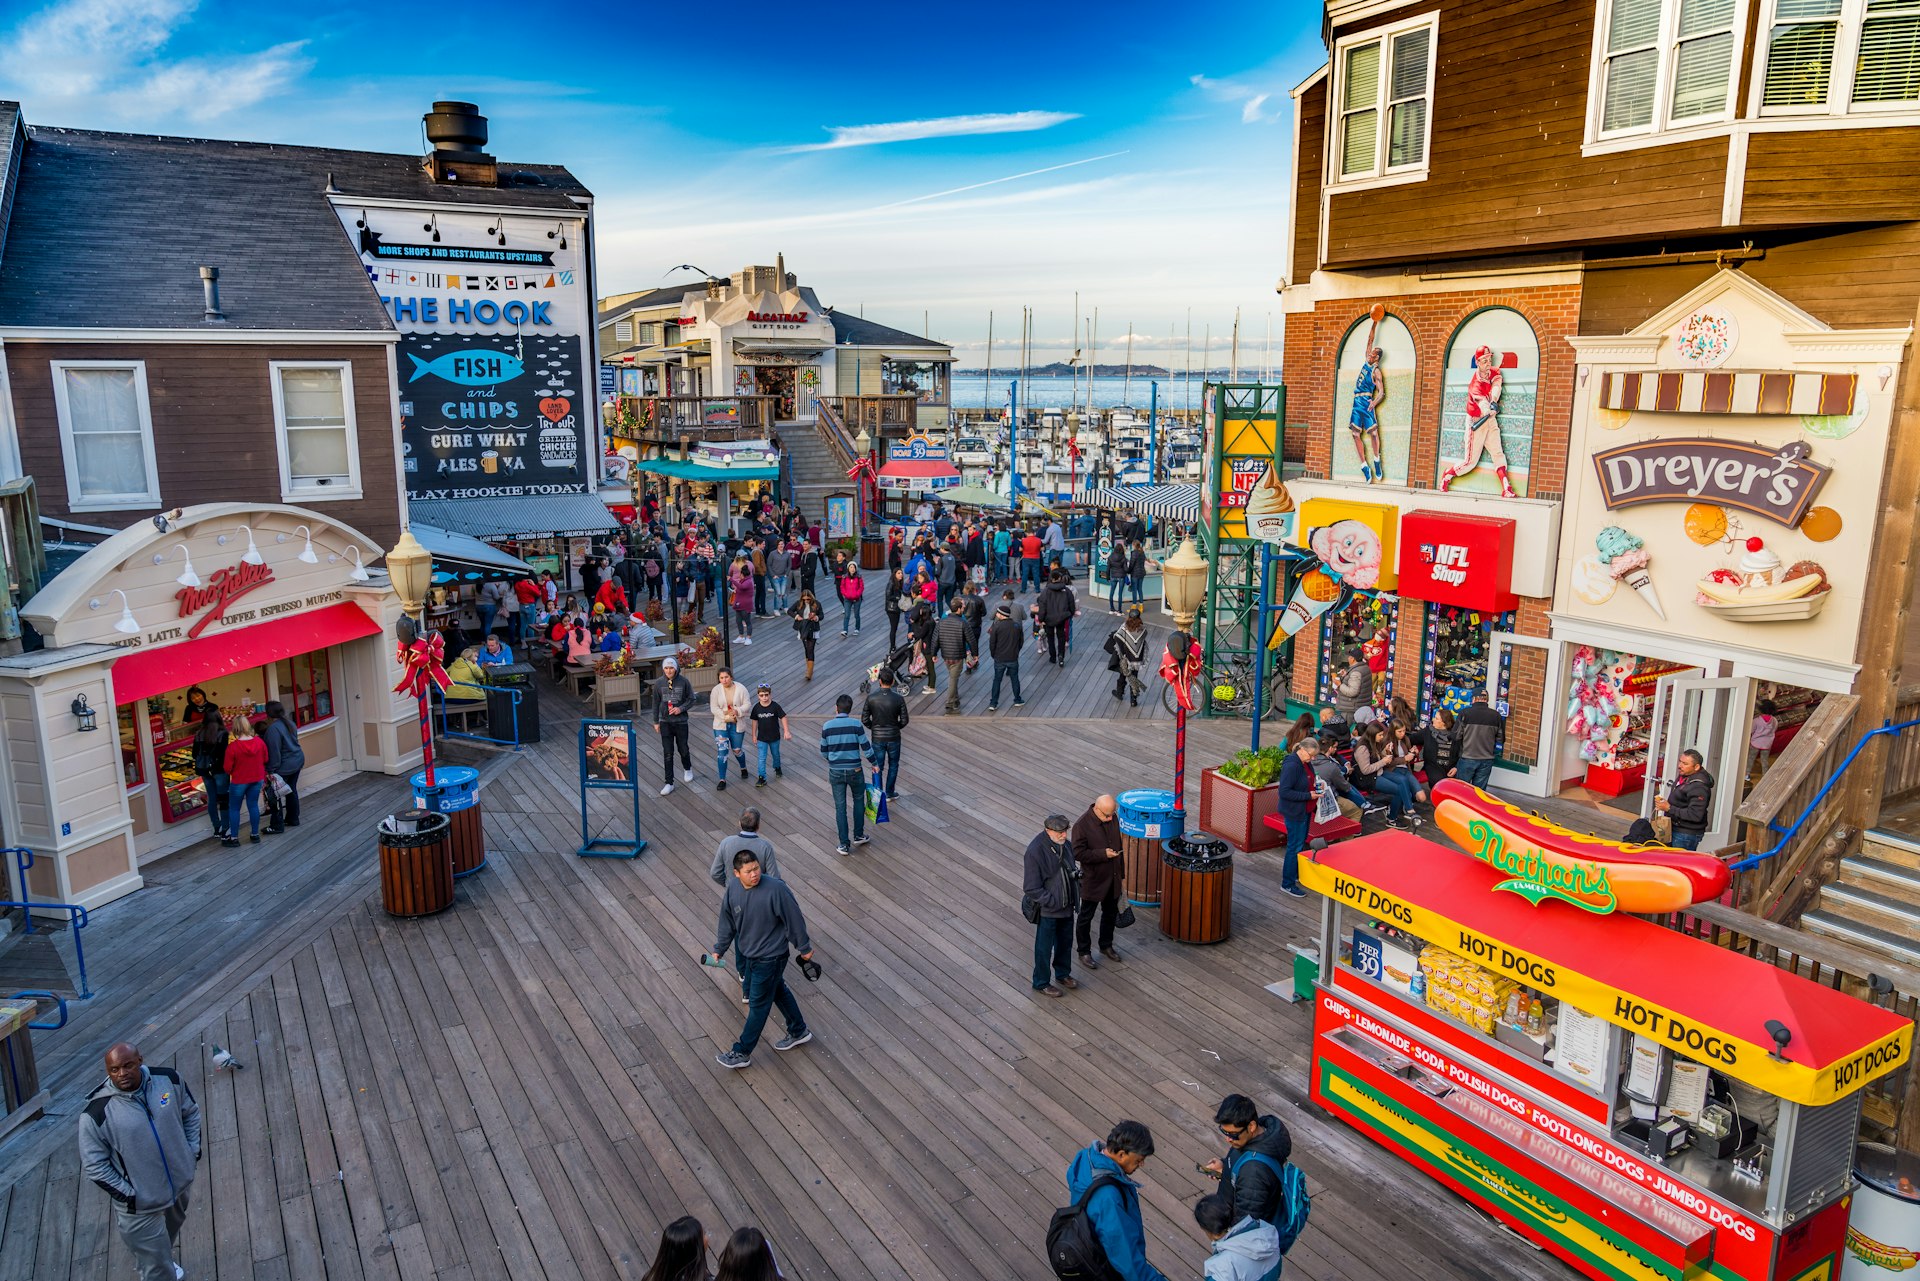 High-angle view of the boardwalk at Pier 39 in Fisherman's Wharf, San Francisco